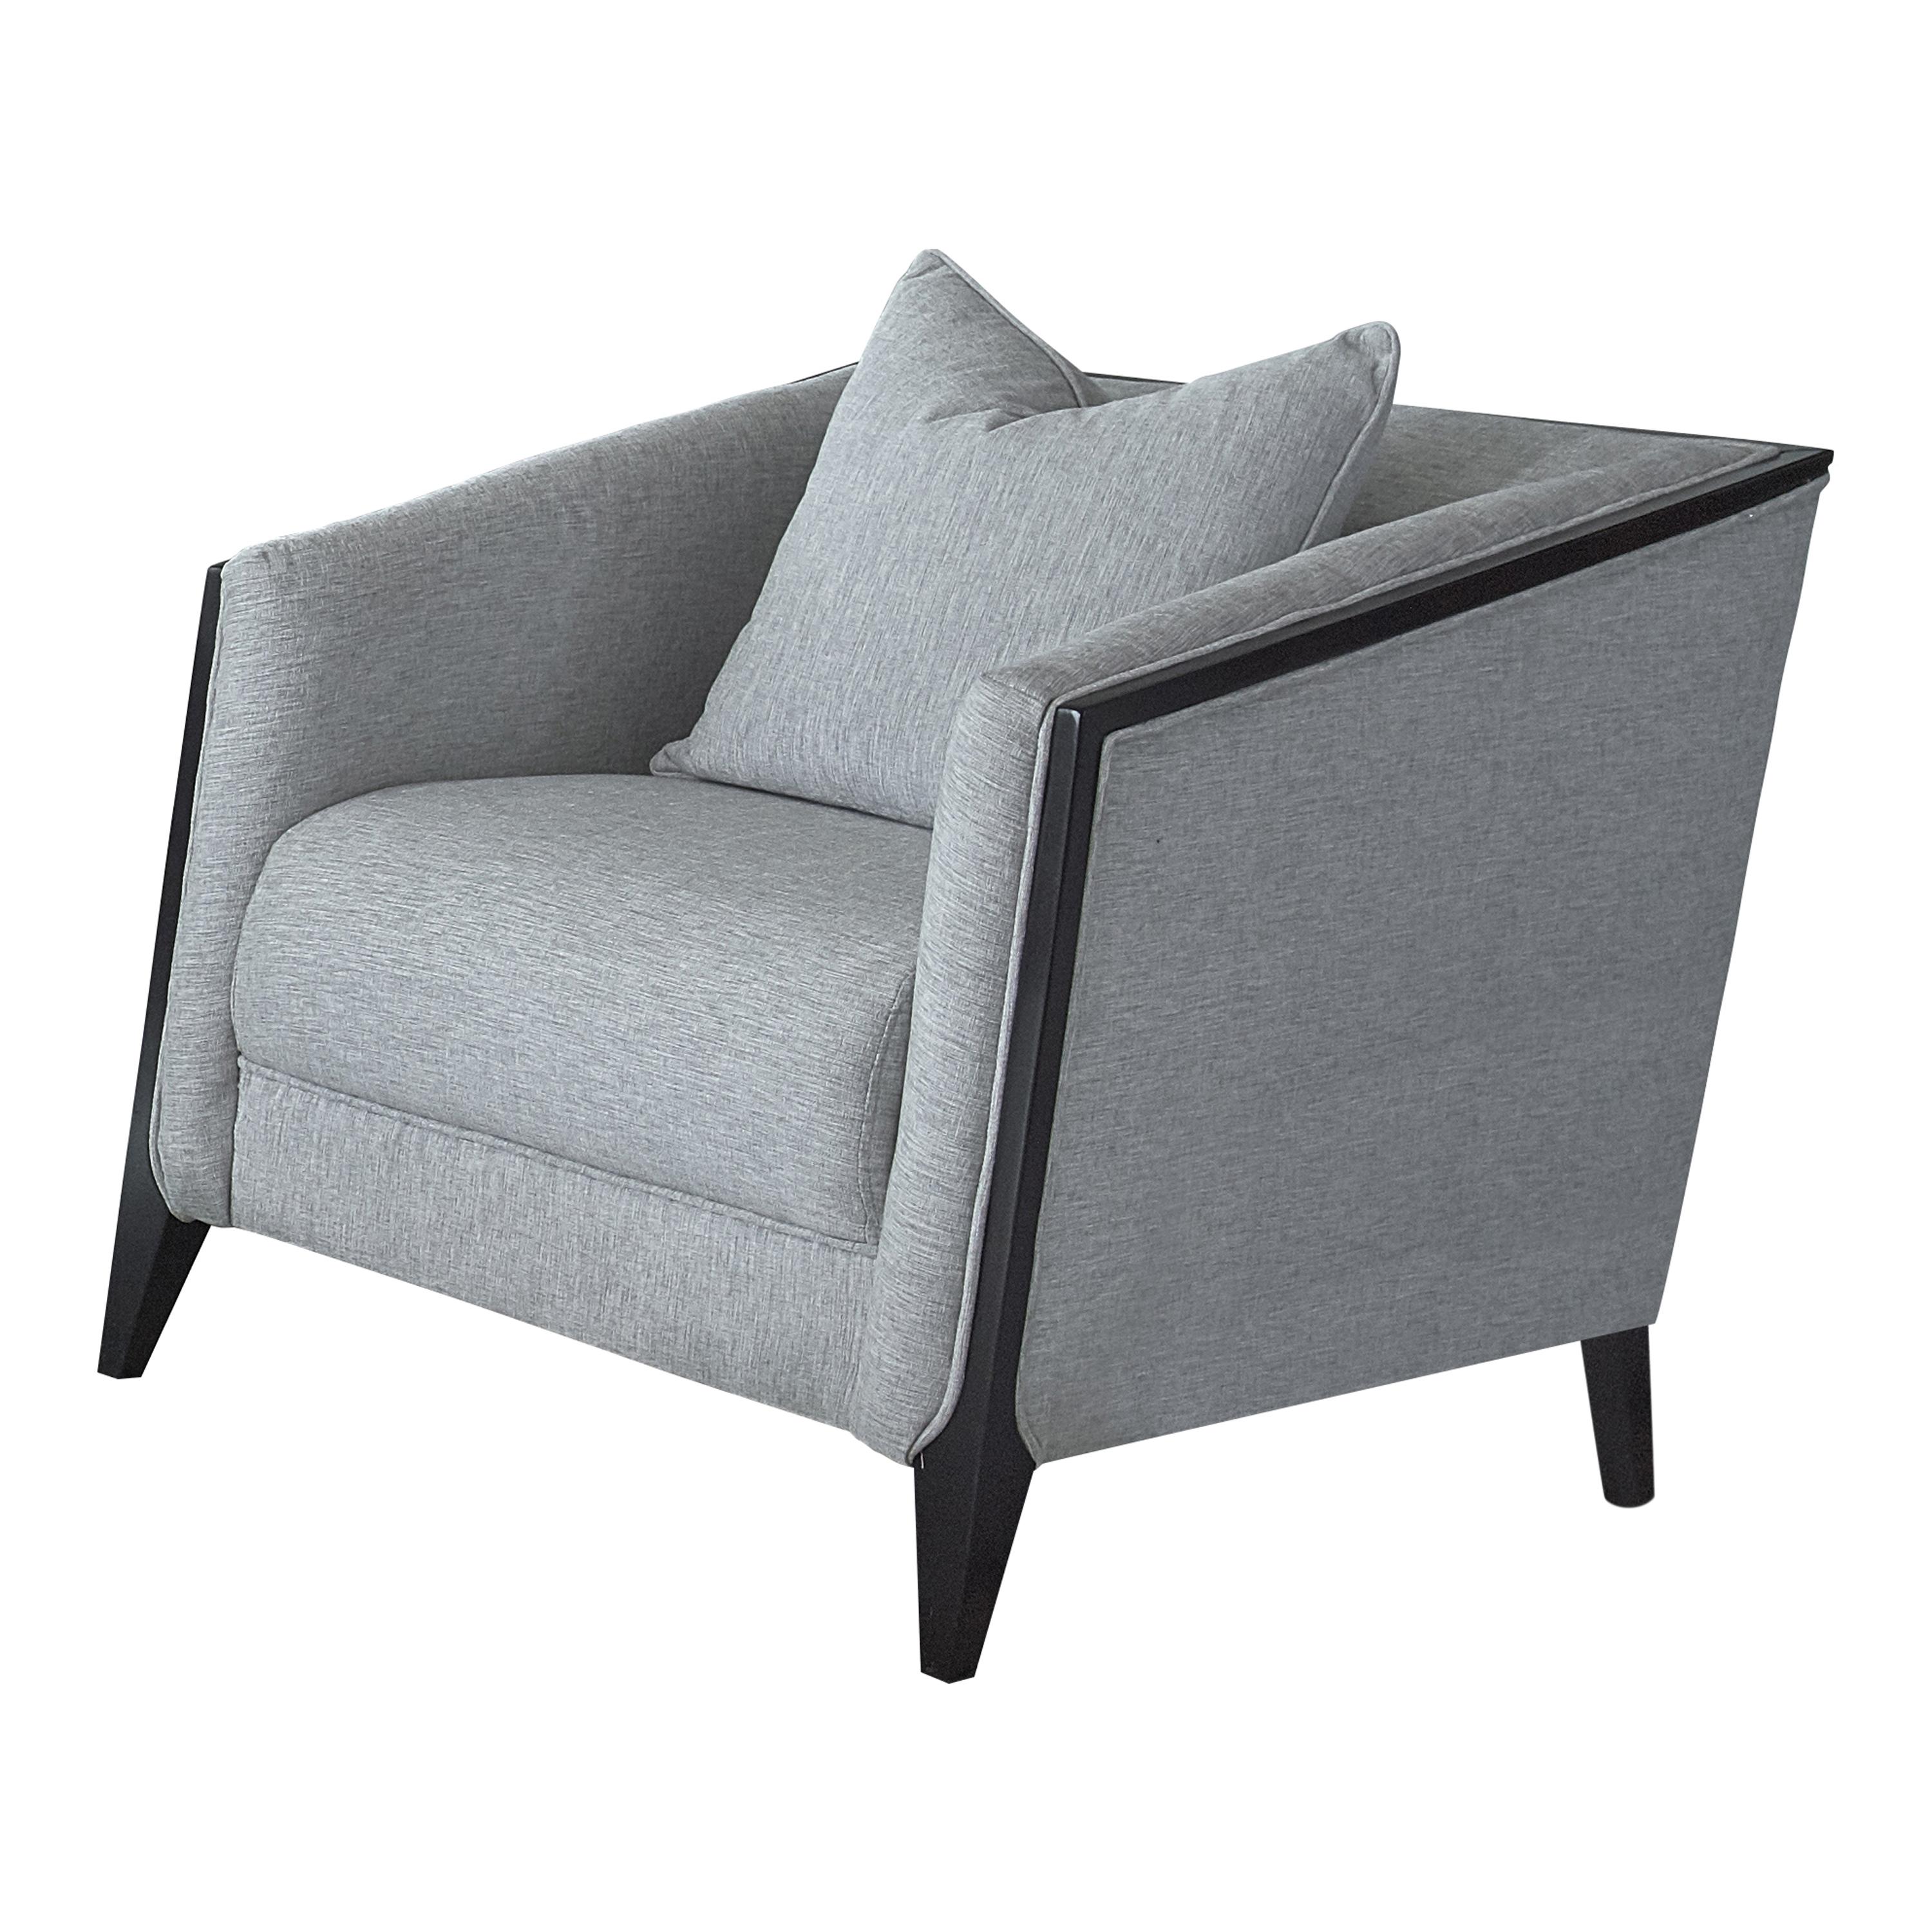 Transitional Arm Chair 509203 Whitfield 509203 in Gray Chenille